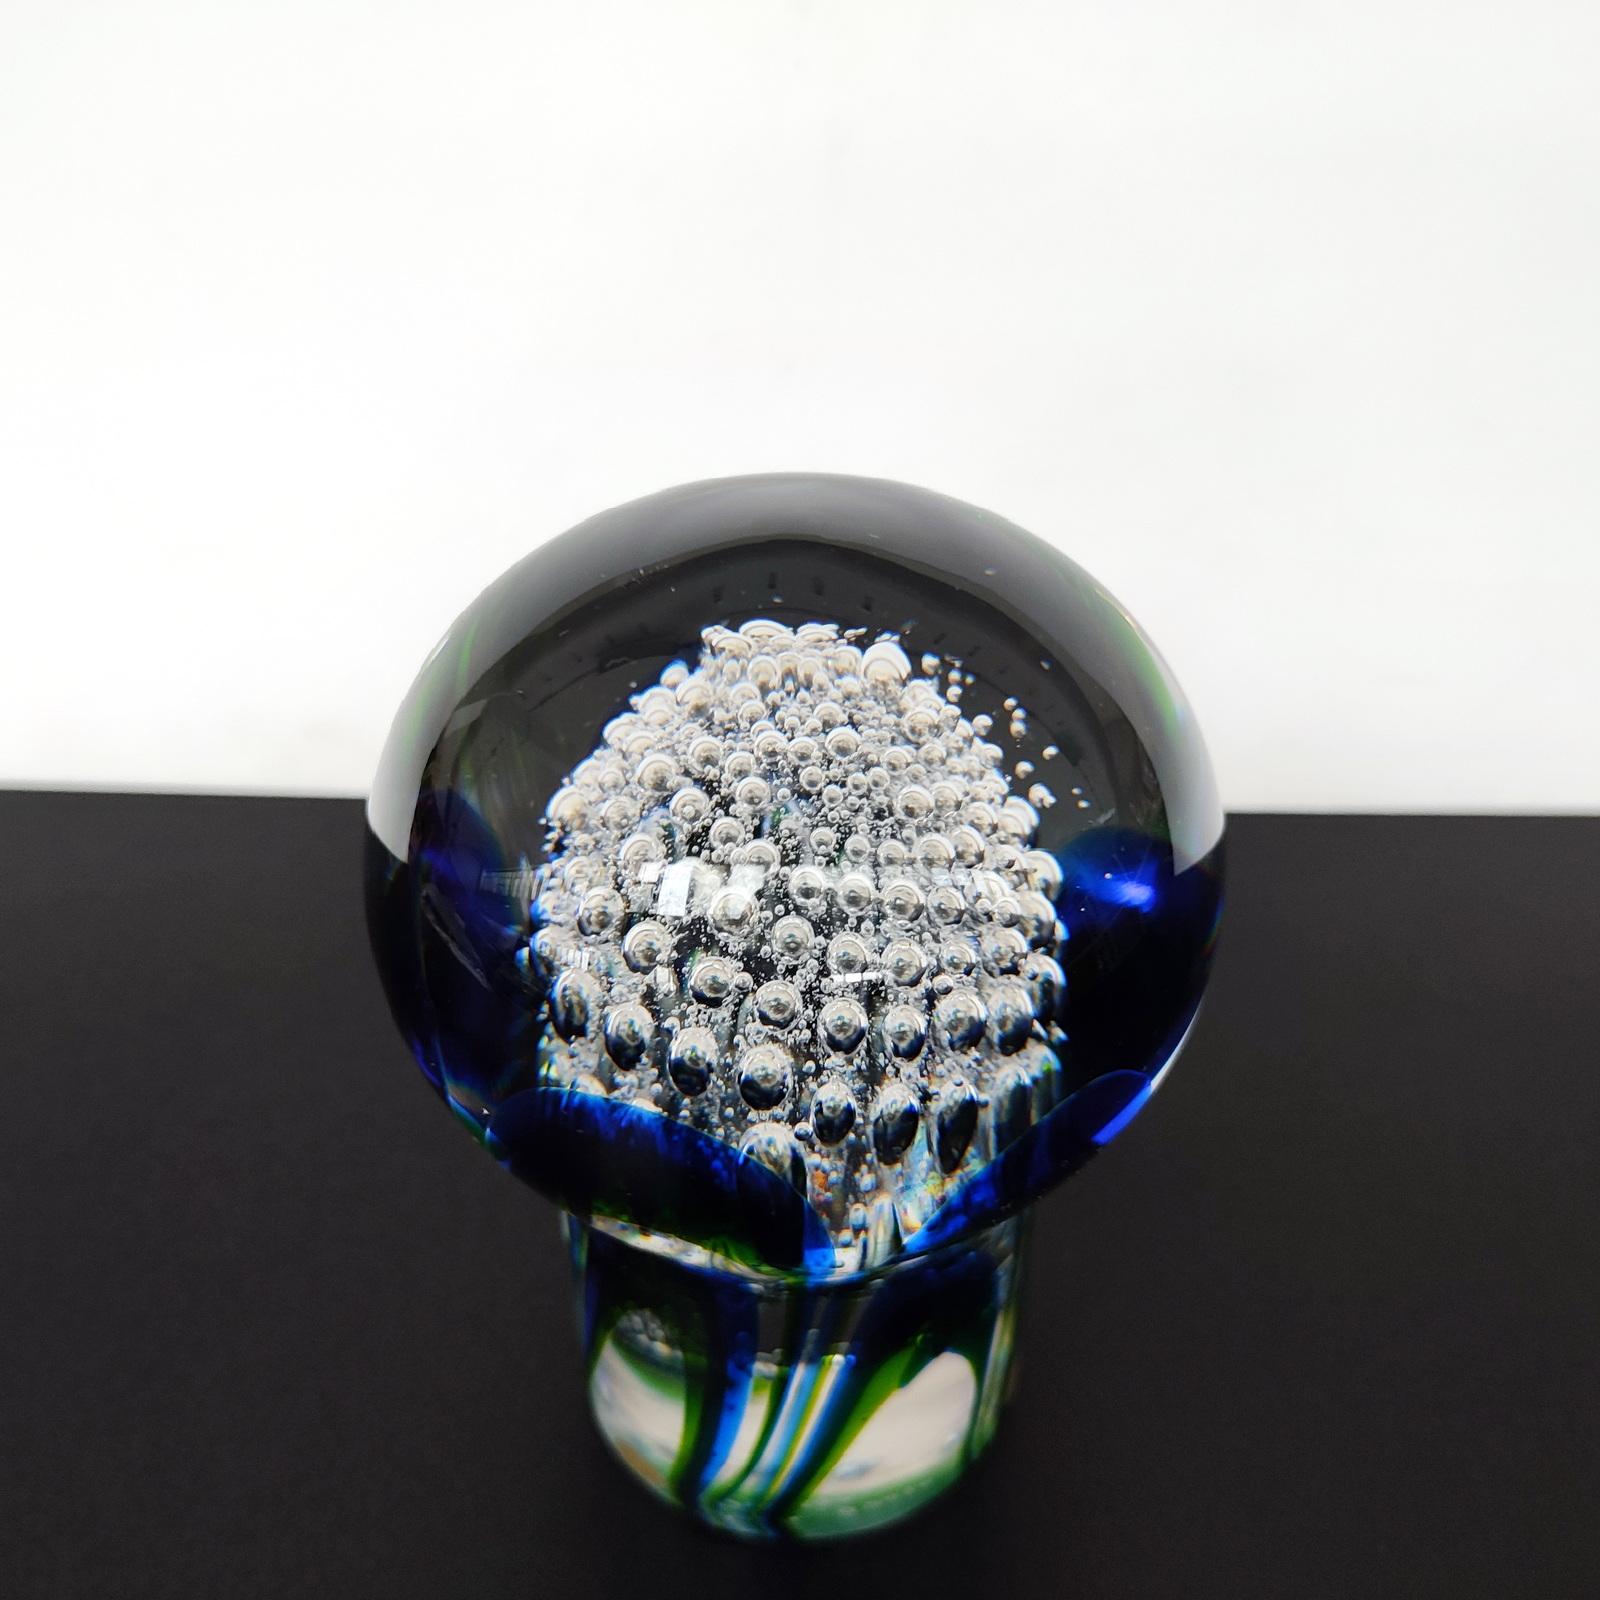 Swedish Glass Paperweight by Goran Warff for Kosta Boda, Rare Find - FREE SHIPPING For Sale